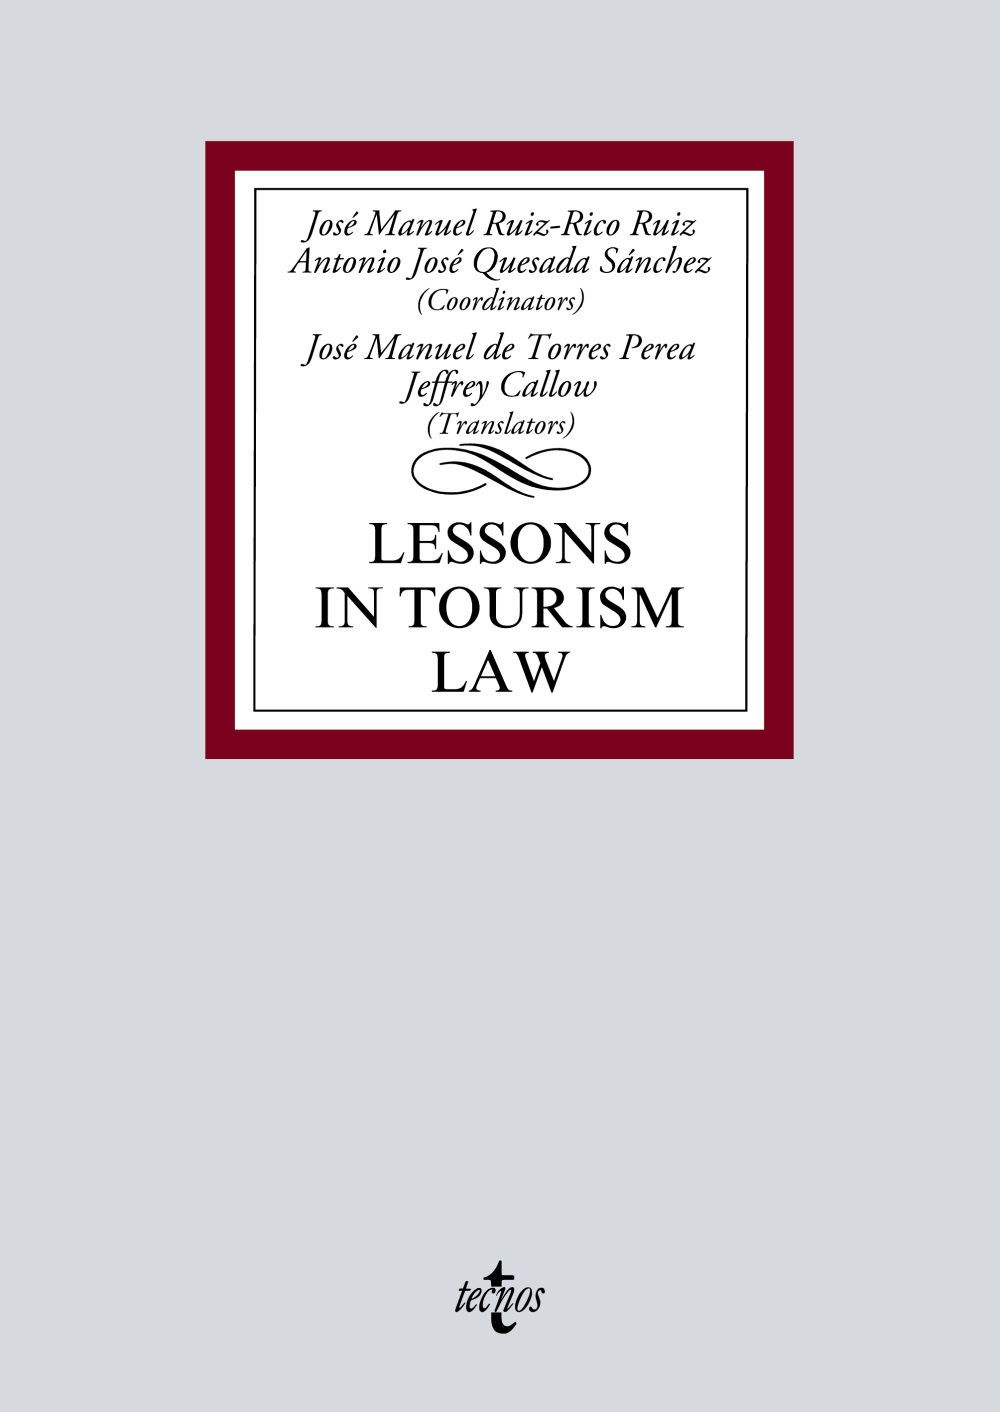 Lessons in Tourism Law. 9788430984299